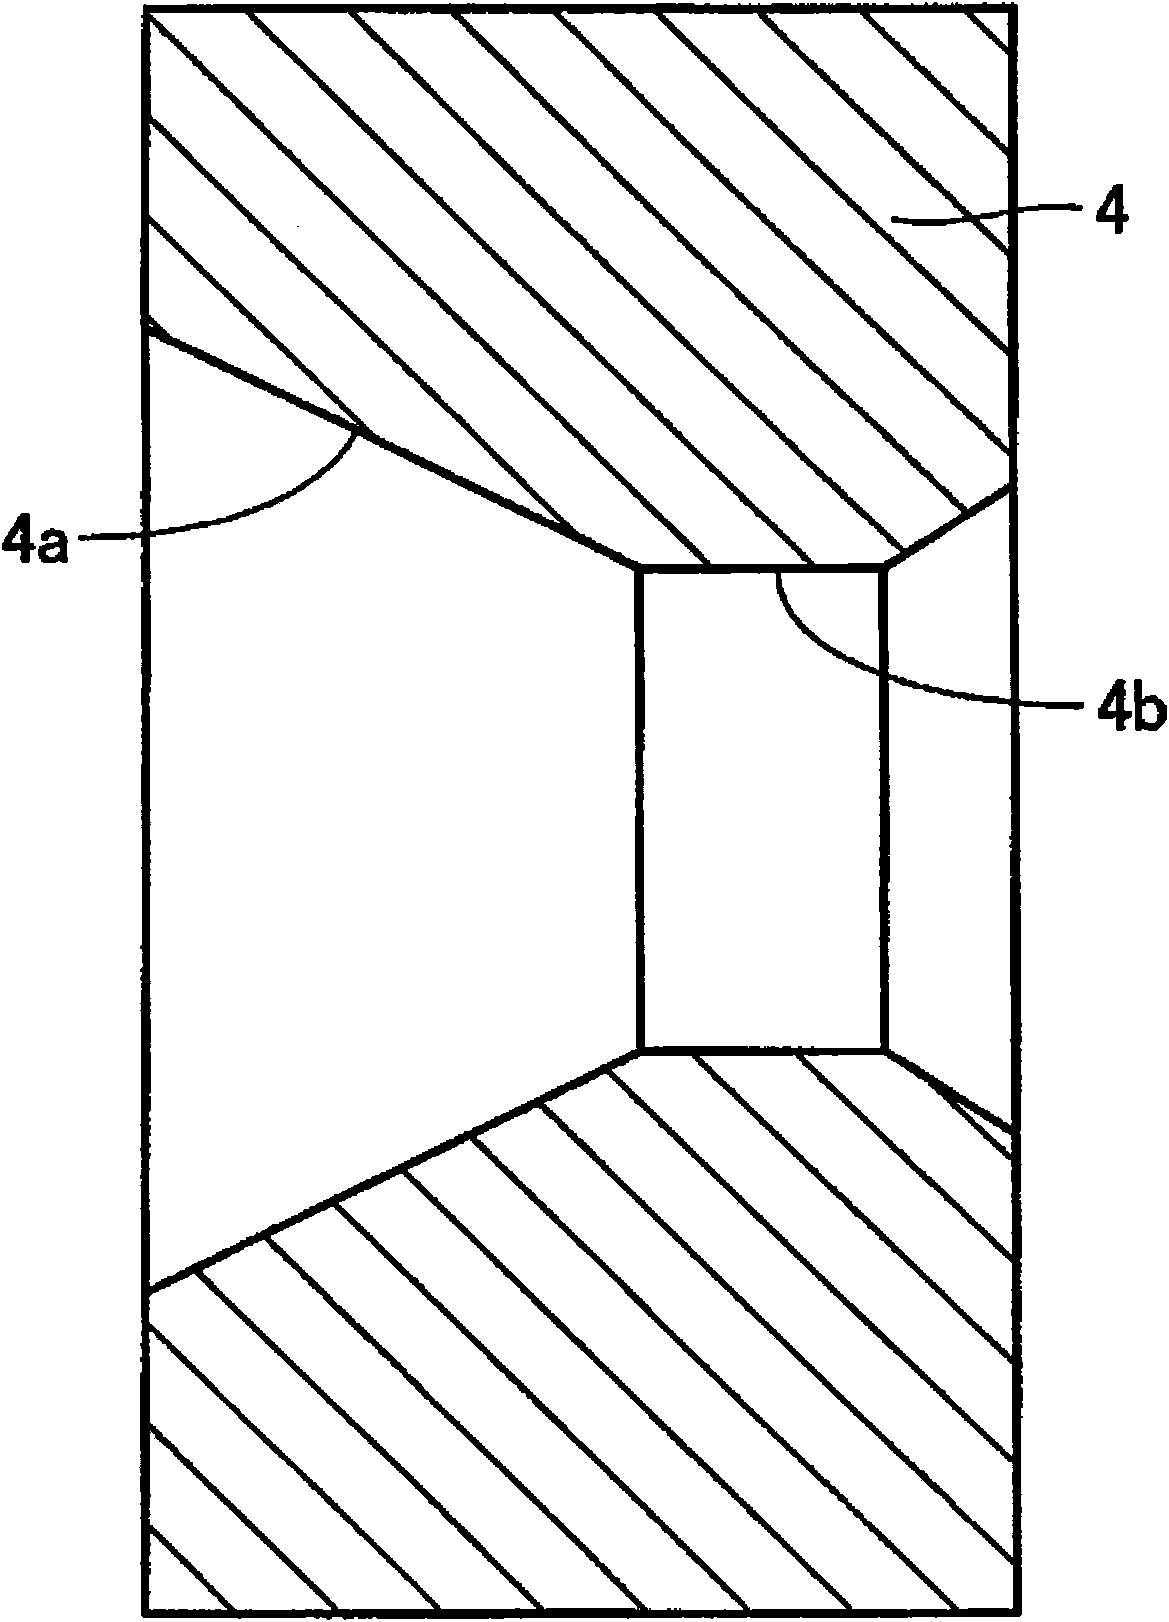 Drawing plug of pipe material and drawing method employing the plug